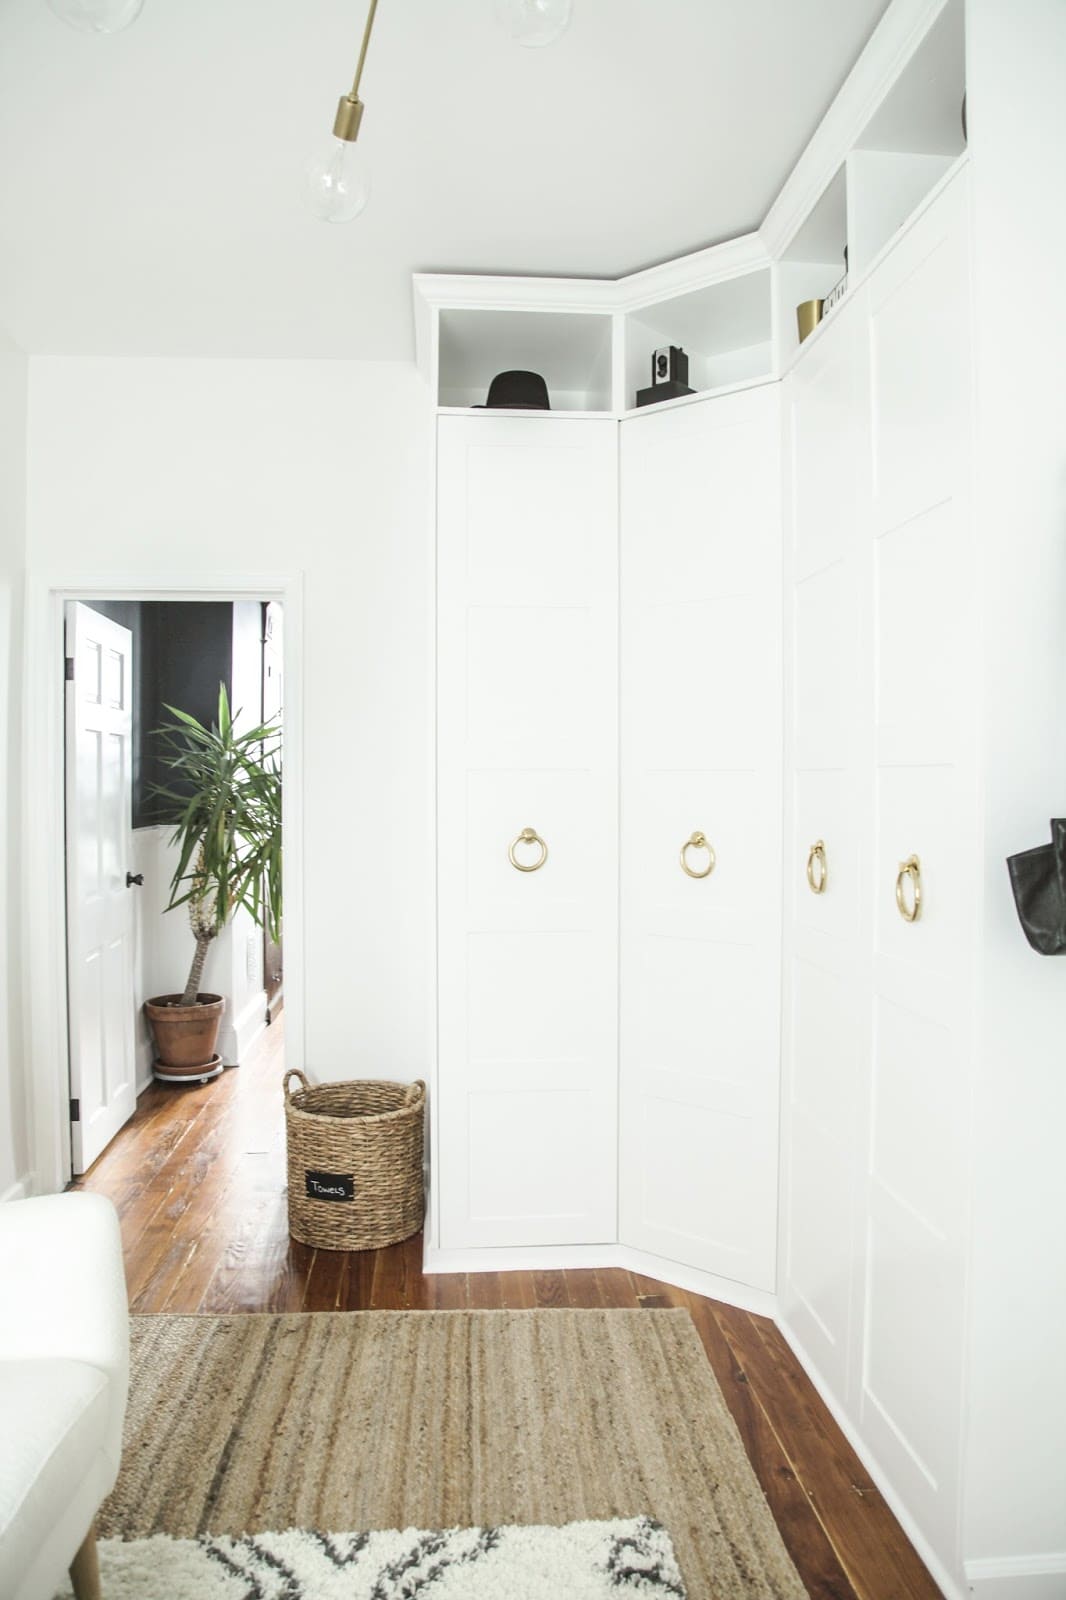 IKEA PAX Wardrobe Hacks That Look Seamless and BuiltIn Apartment Therapy